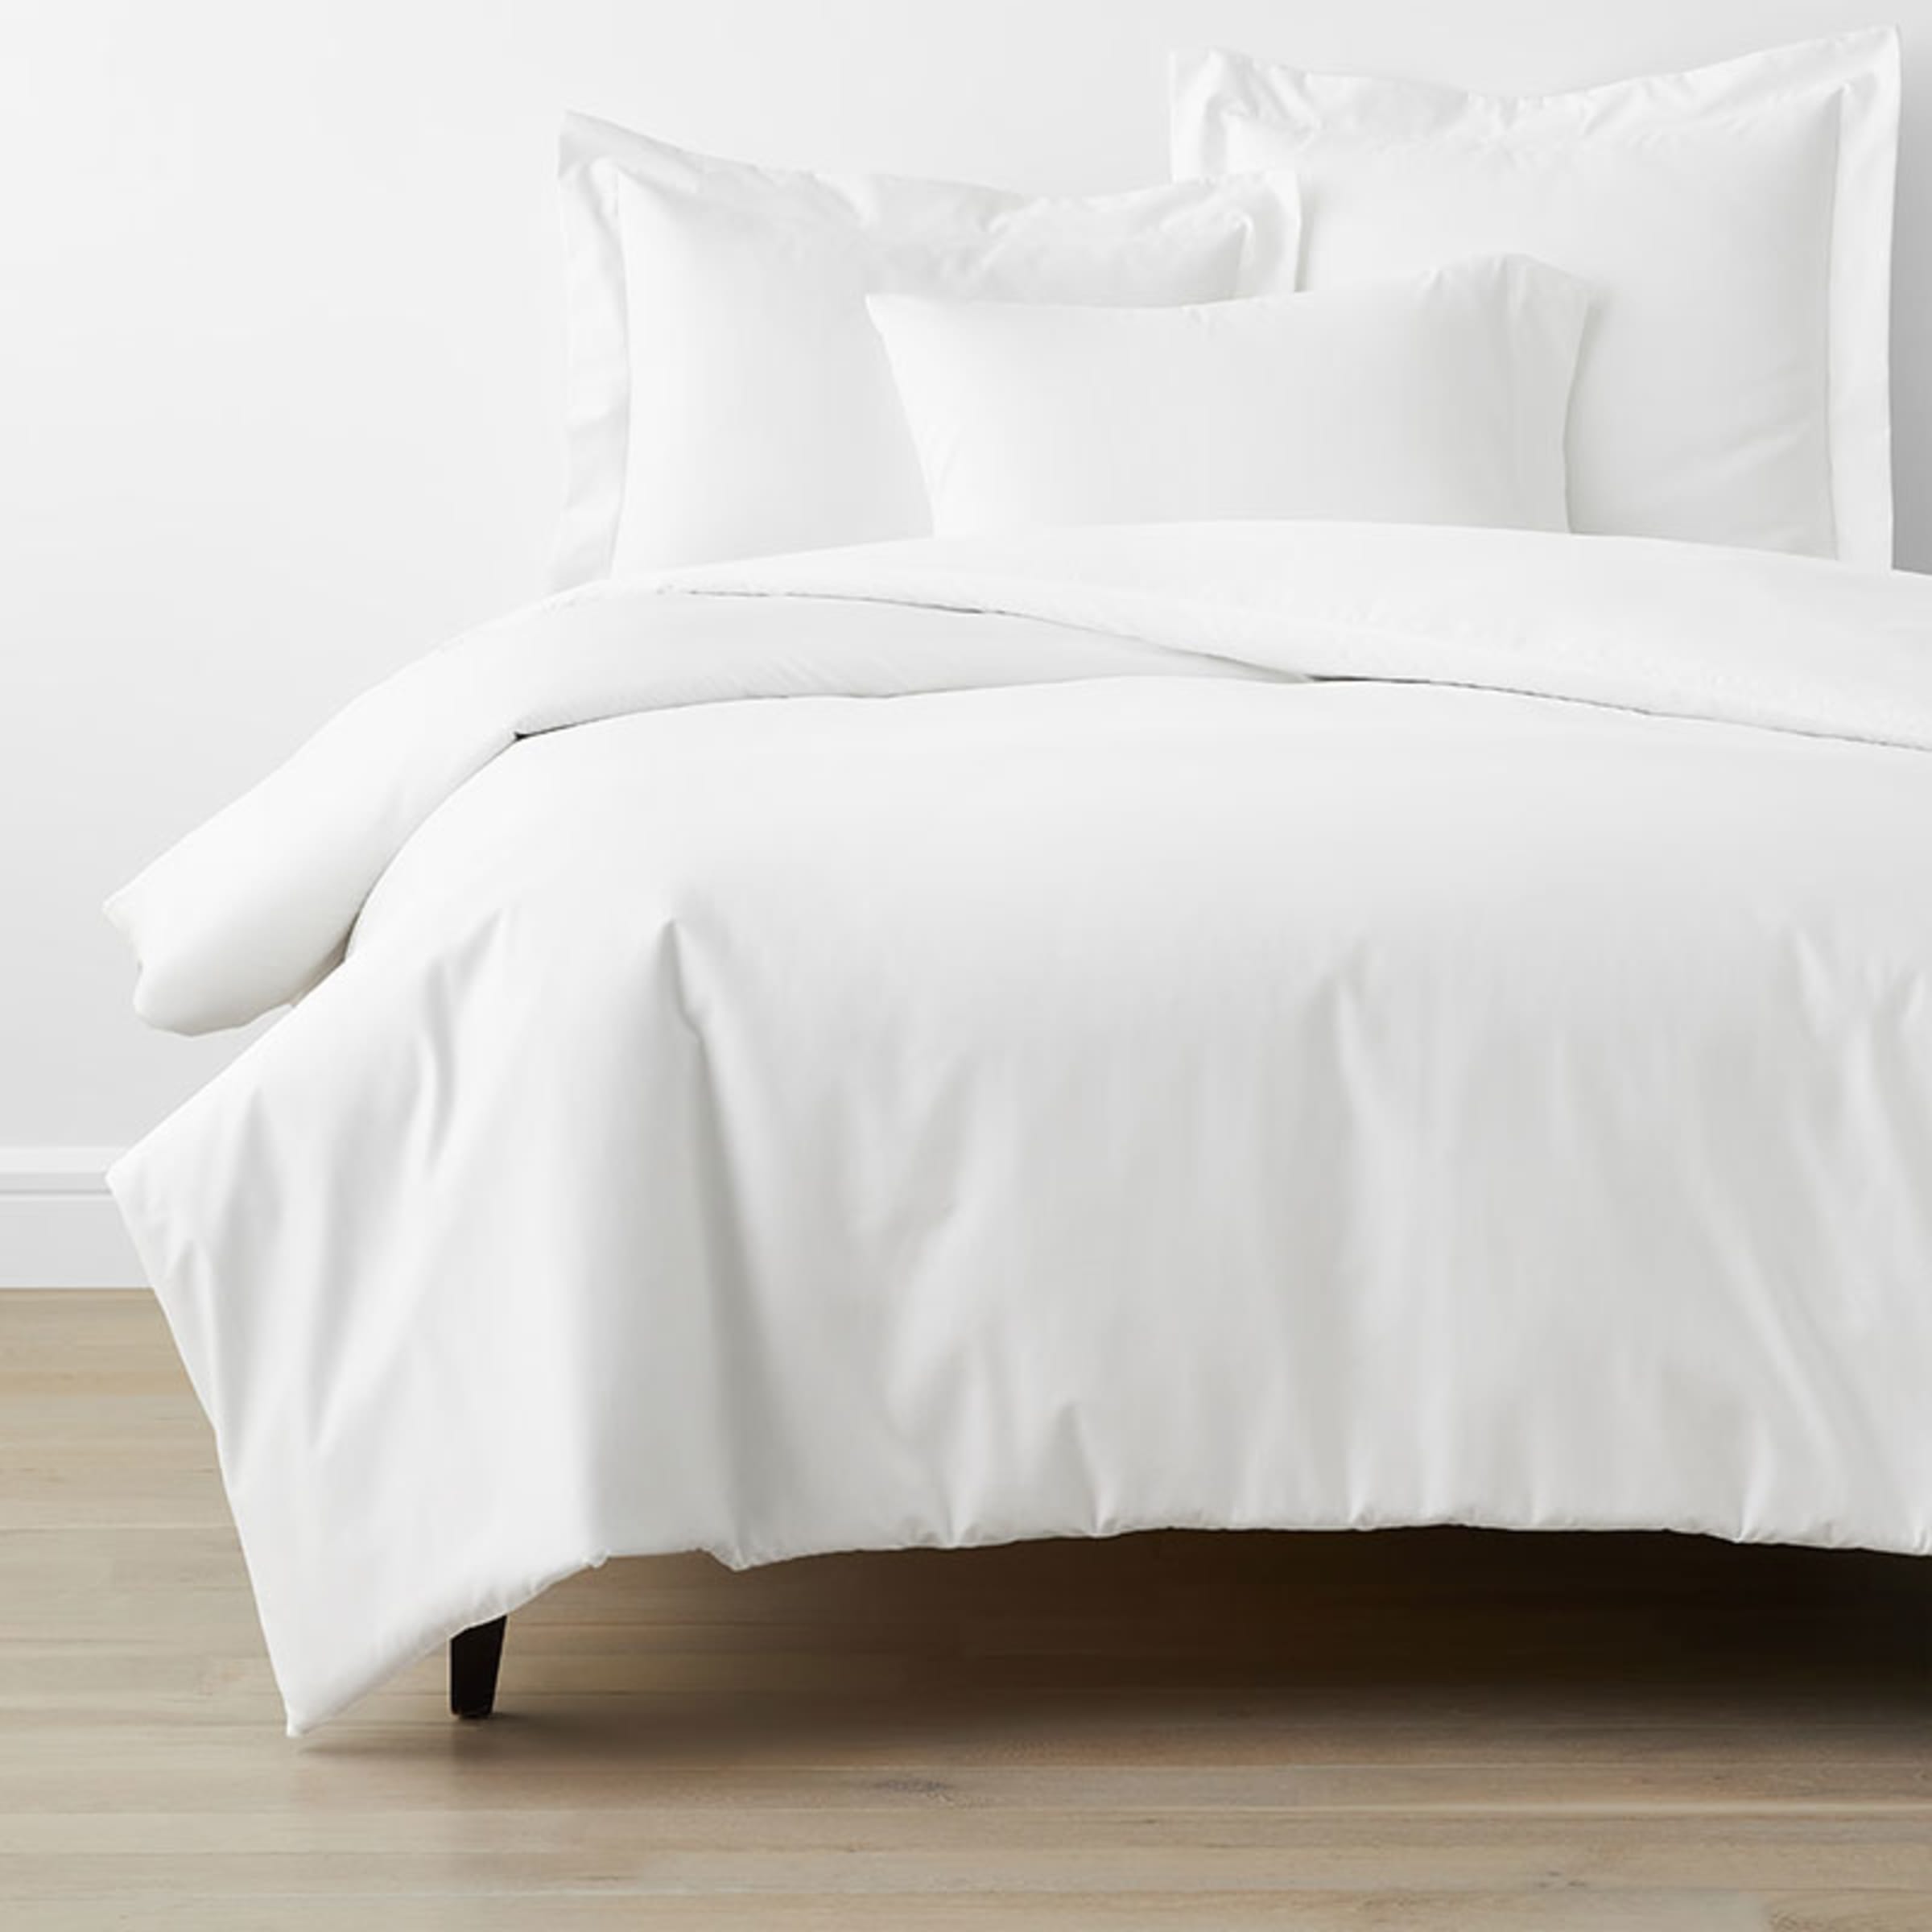 Company Cotton™ Wrinkle-Free Sateen Duvet Cover | The Company Store